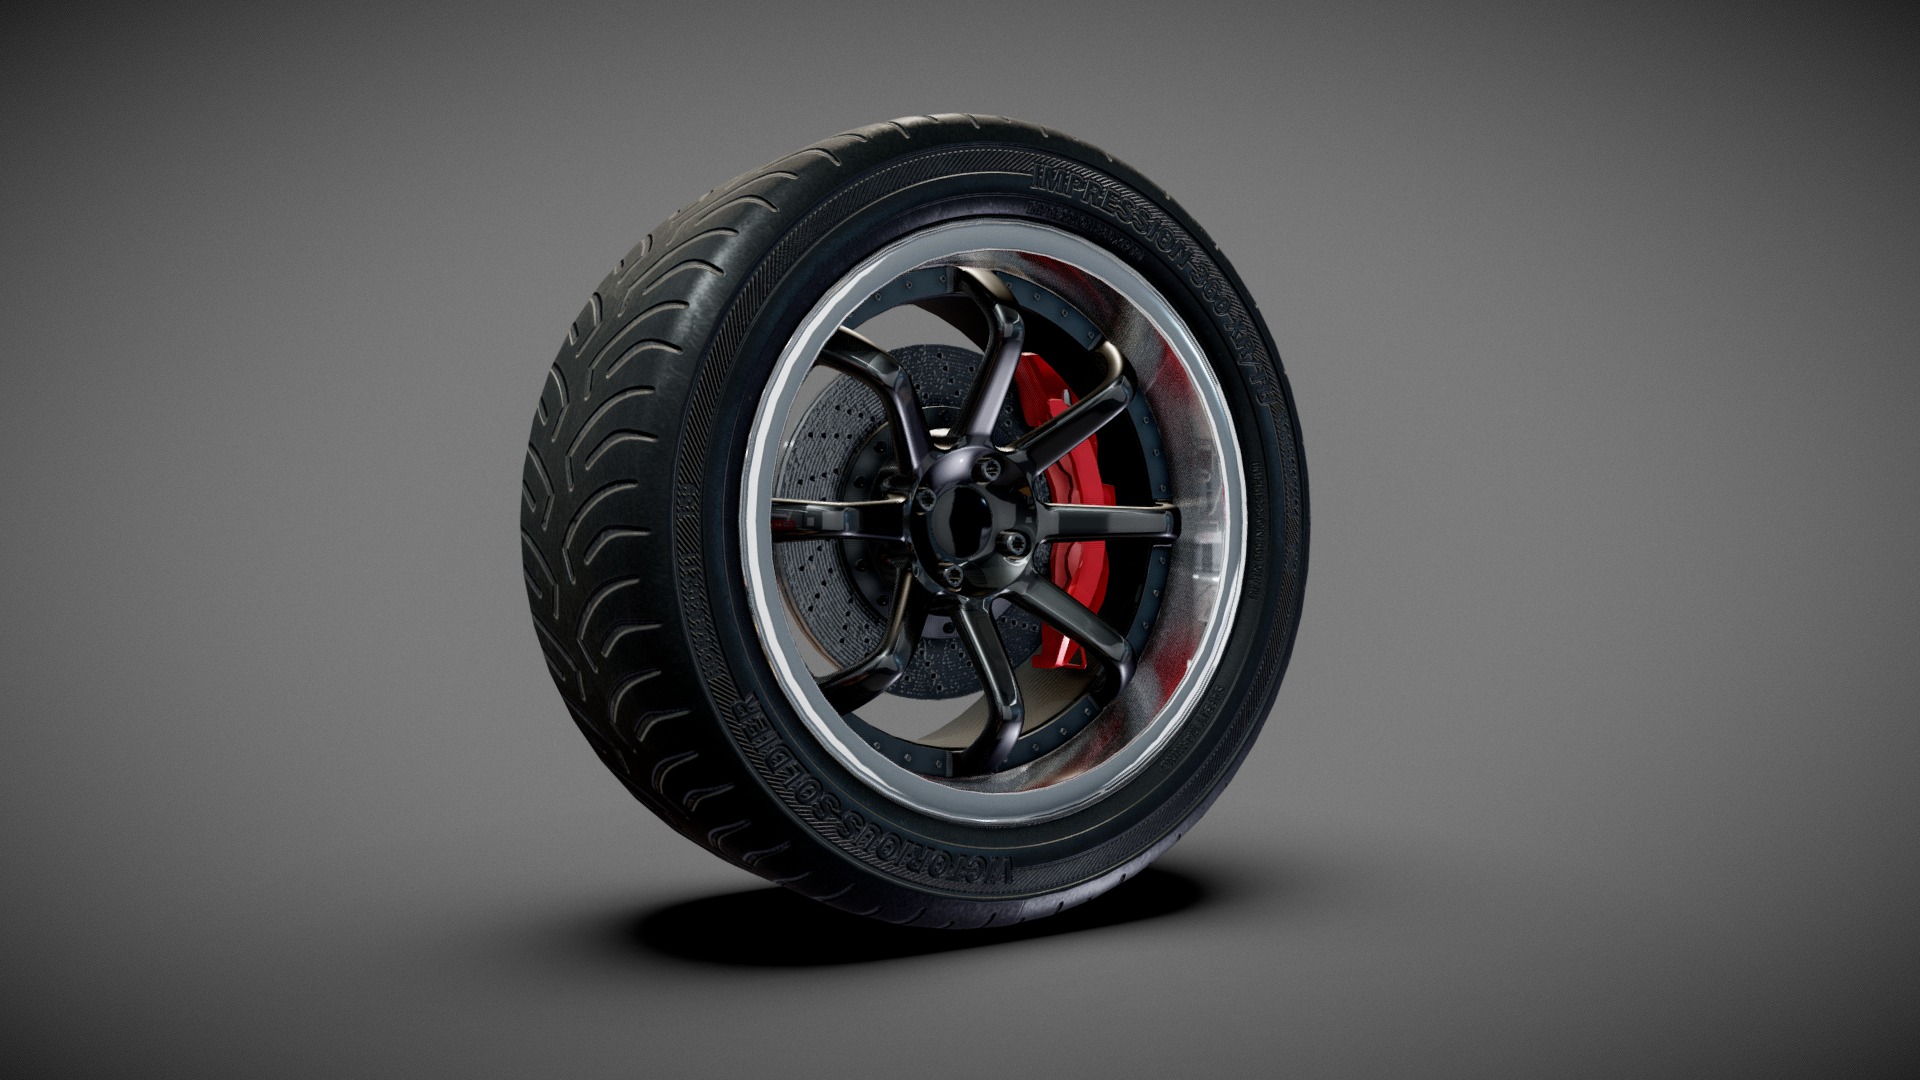 3D model Tune Racing Tire and Rim 2 - This is a 3D model of the Tune Racing Tire and Rim 2. The 3D model is about a black and red car tire.